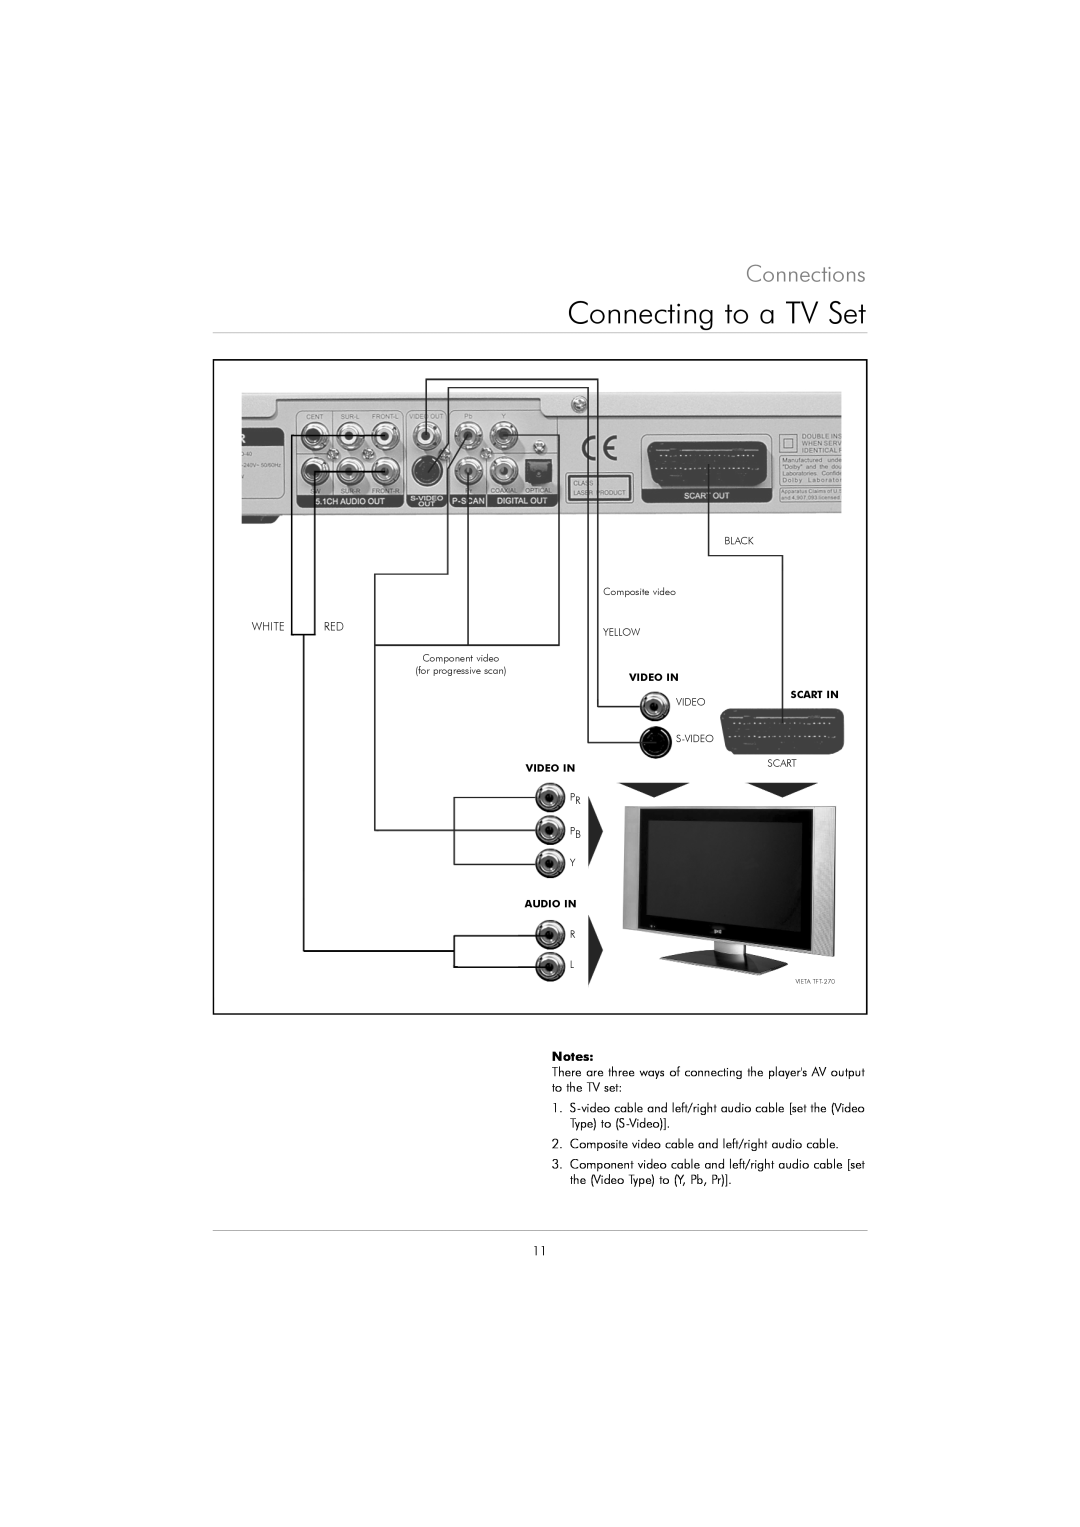 Kodak DVD 40 user manual Connecting to a TV Set, Connections 